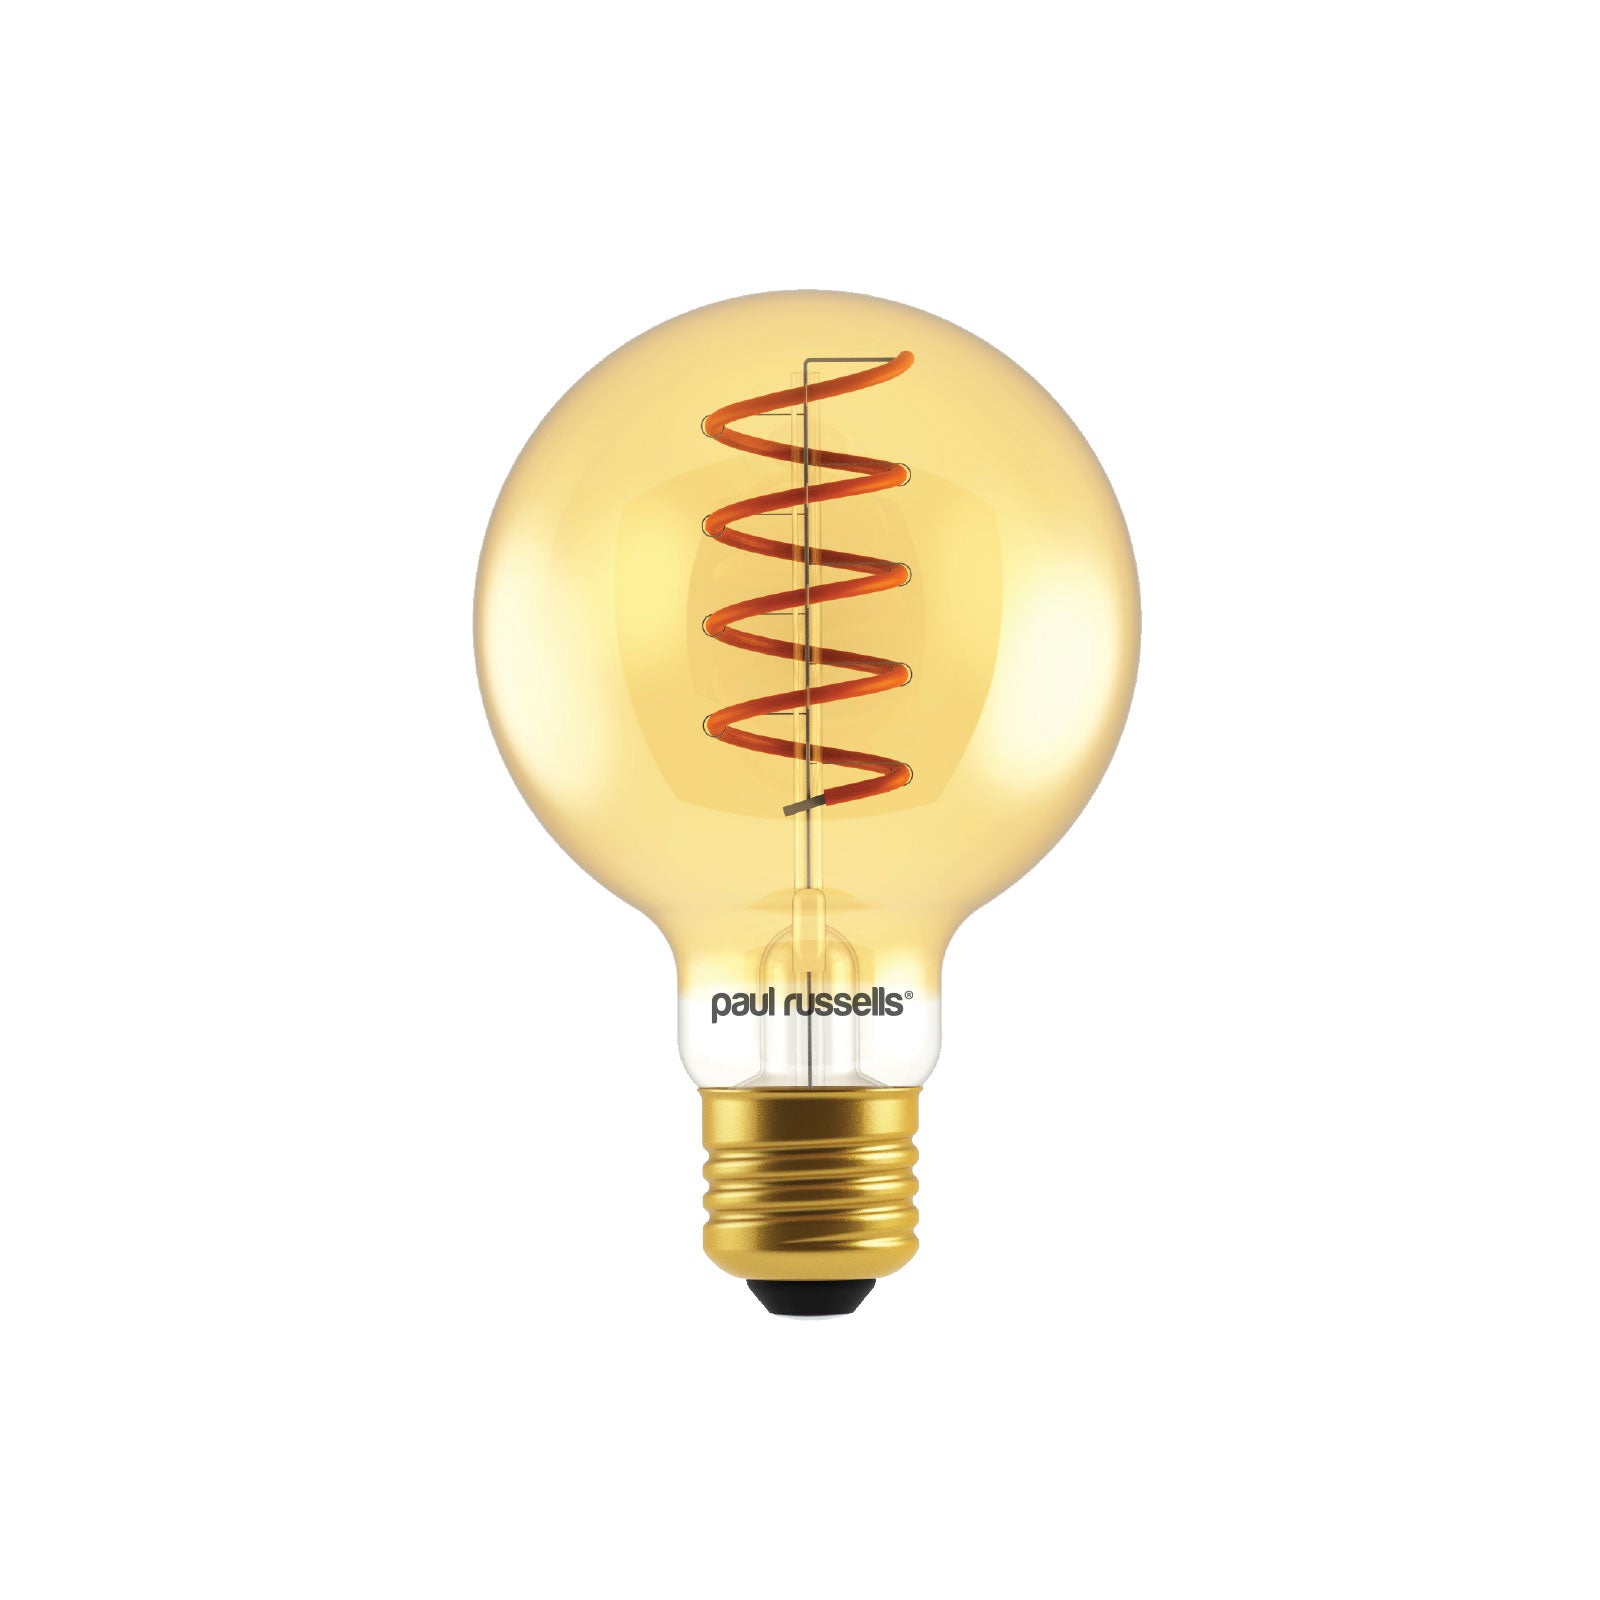 LED Filament Spiral G80 White Extra ES Edison E27 paul (AMBER) 4W=25w russells Warm –